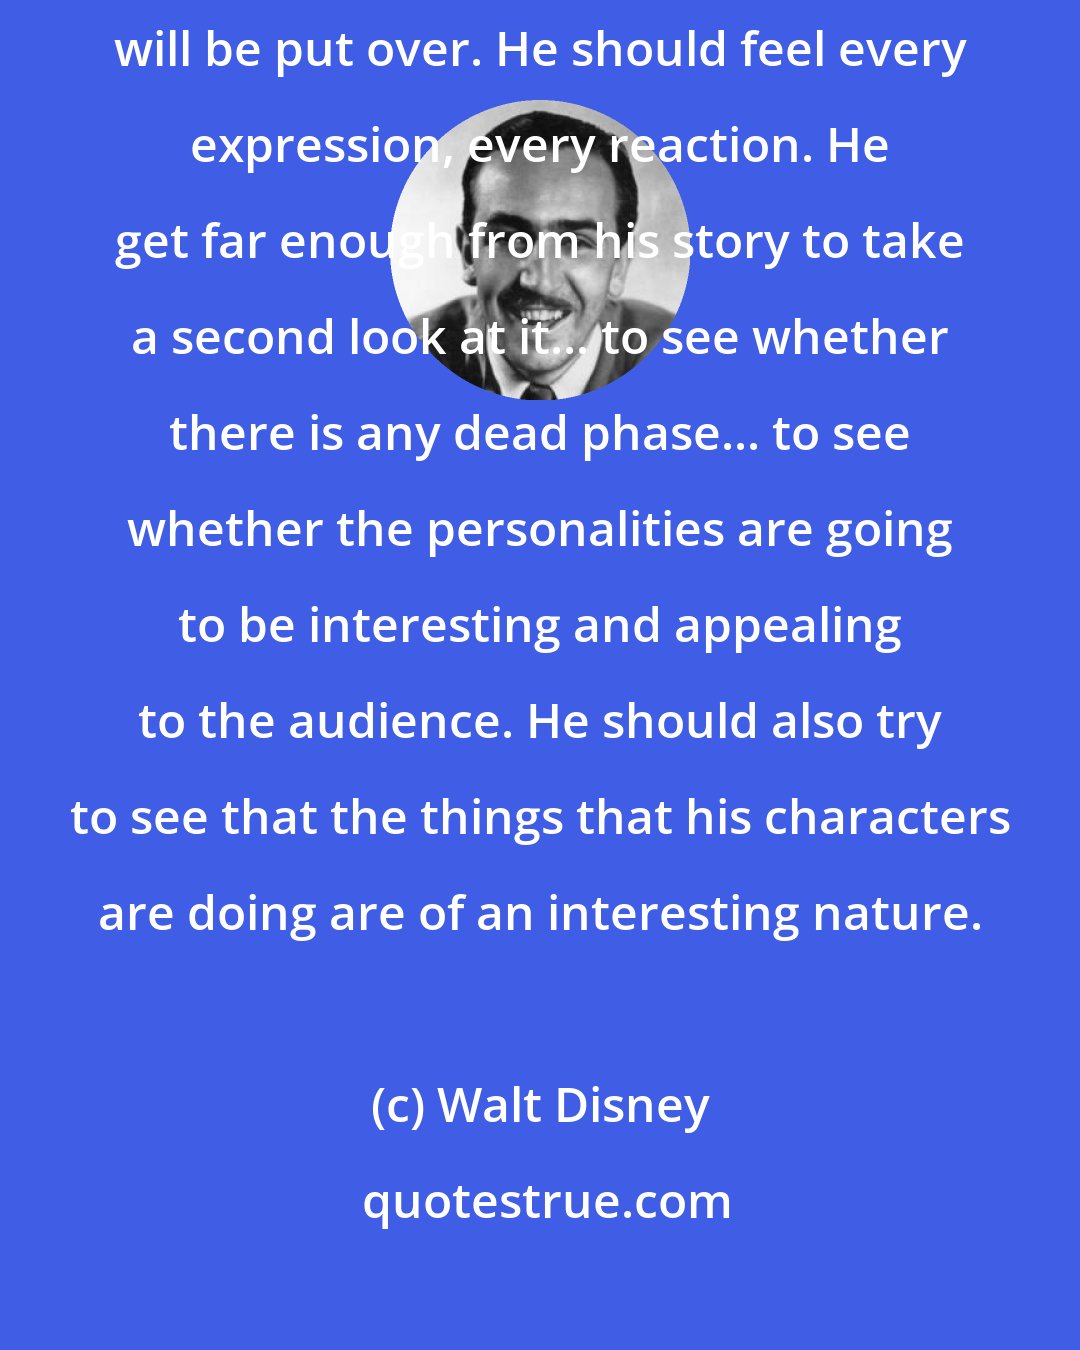 Walt Disney: The story man must see clearly in his own mind how every piece of business will be put over. He should feel every expression, every reaction. He get far enough from his story to take a second look at it... to see whether there is any dead phase... to see whether the personalities are going to be interesting and appealing to the audience. He should also try to see that the things that his characters are doing are of an interesting nature.